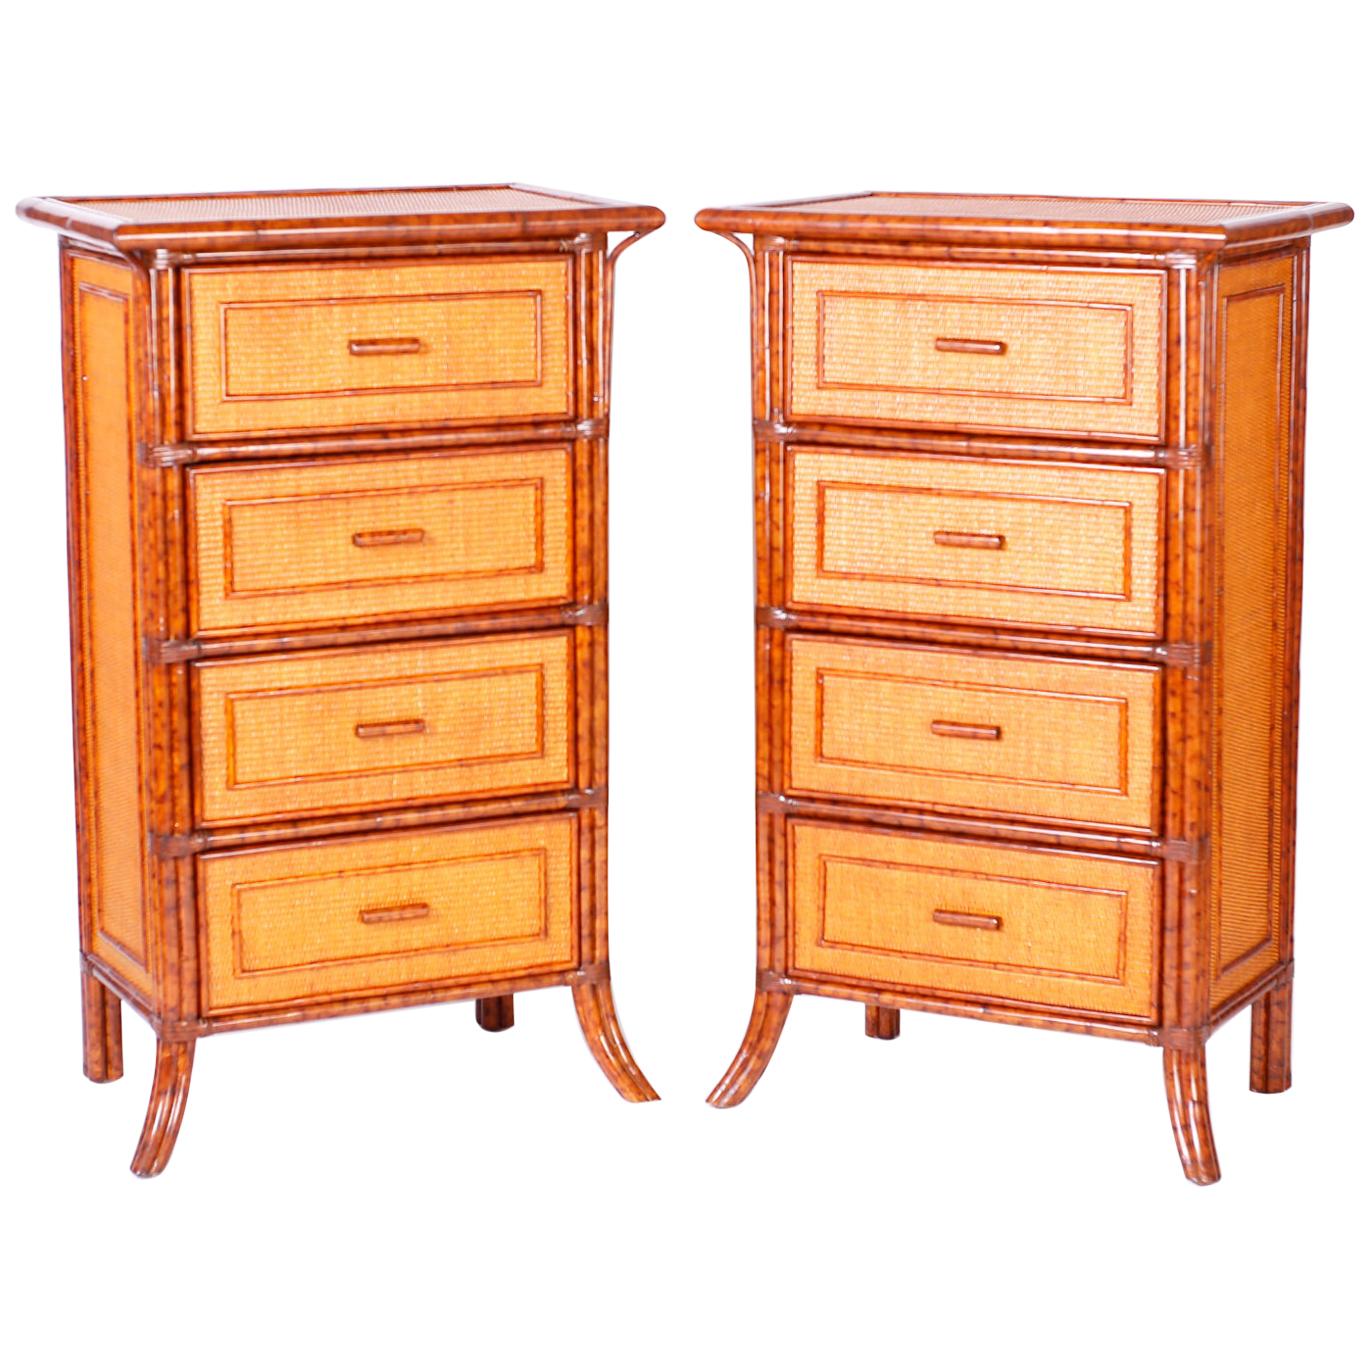 Pair of Midcentury British Colonial Style Faux Bamboo and Grasscloth Chests